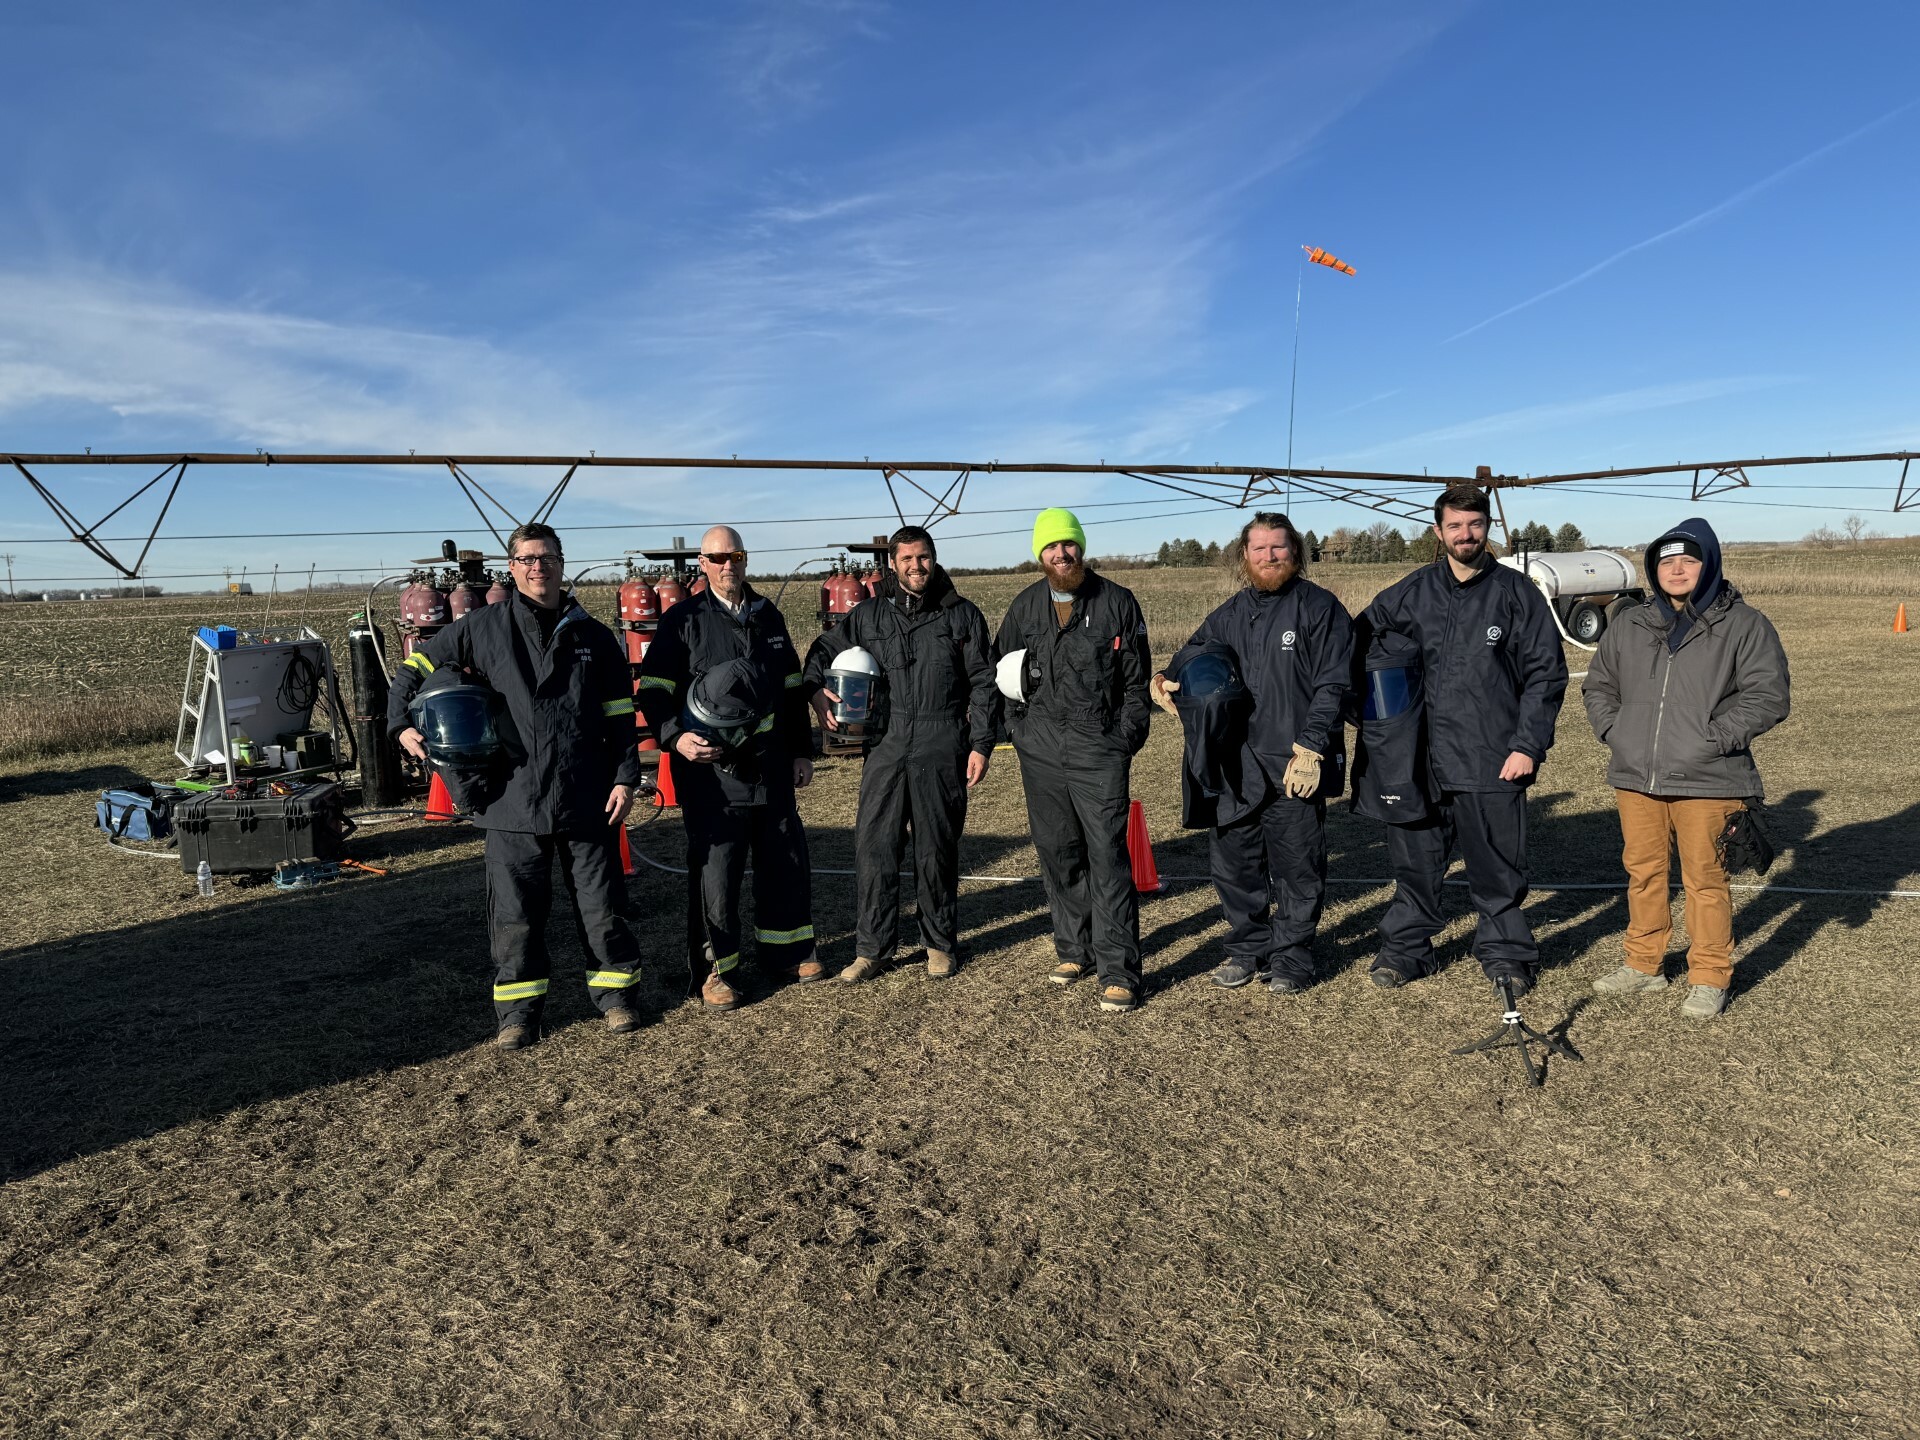 The team in charge of the launch of the balloon and safety measures. (Image: Aerostar)